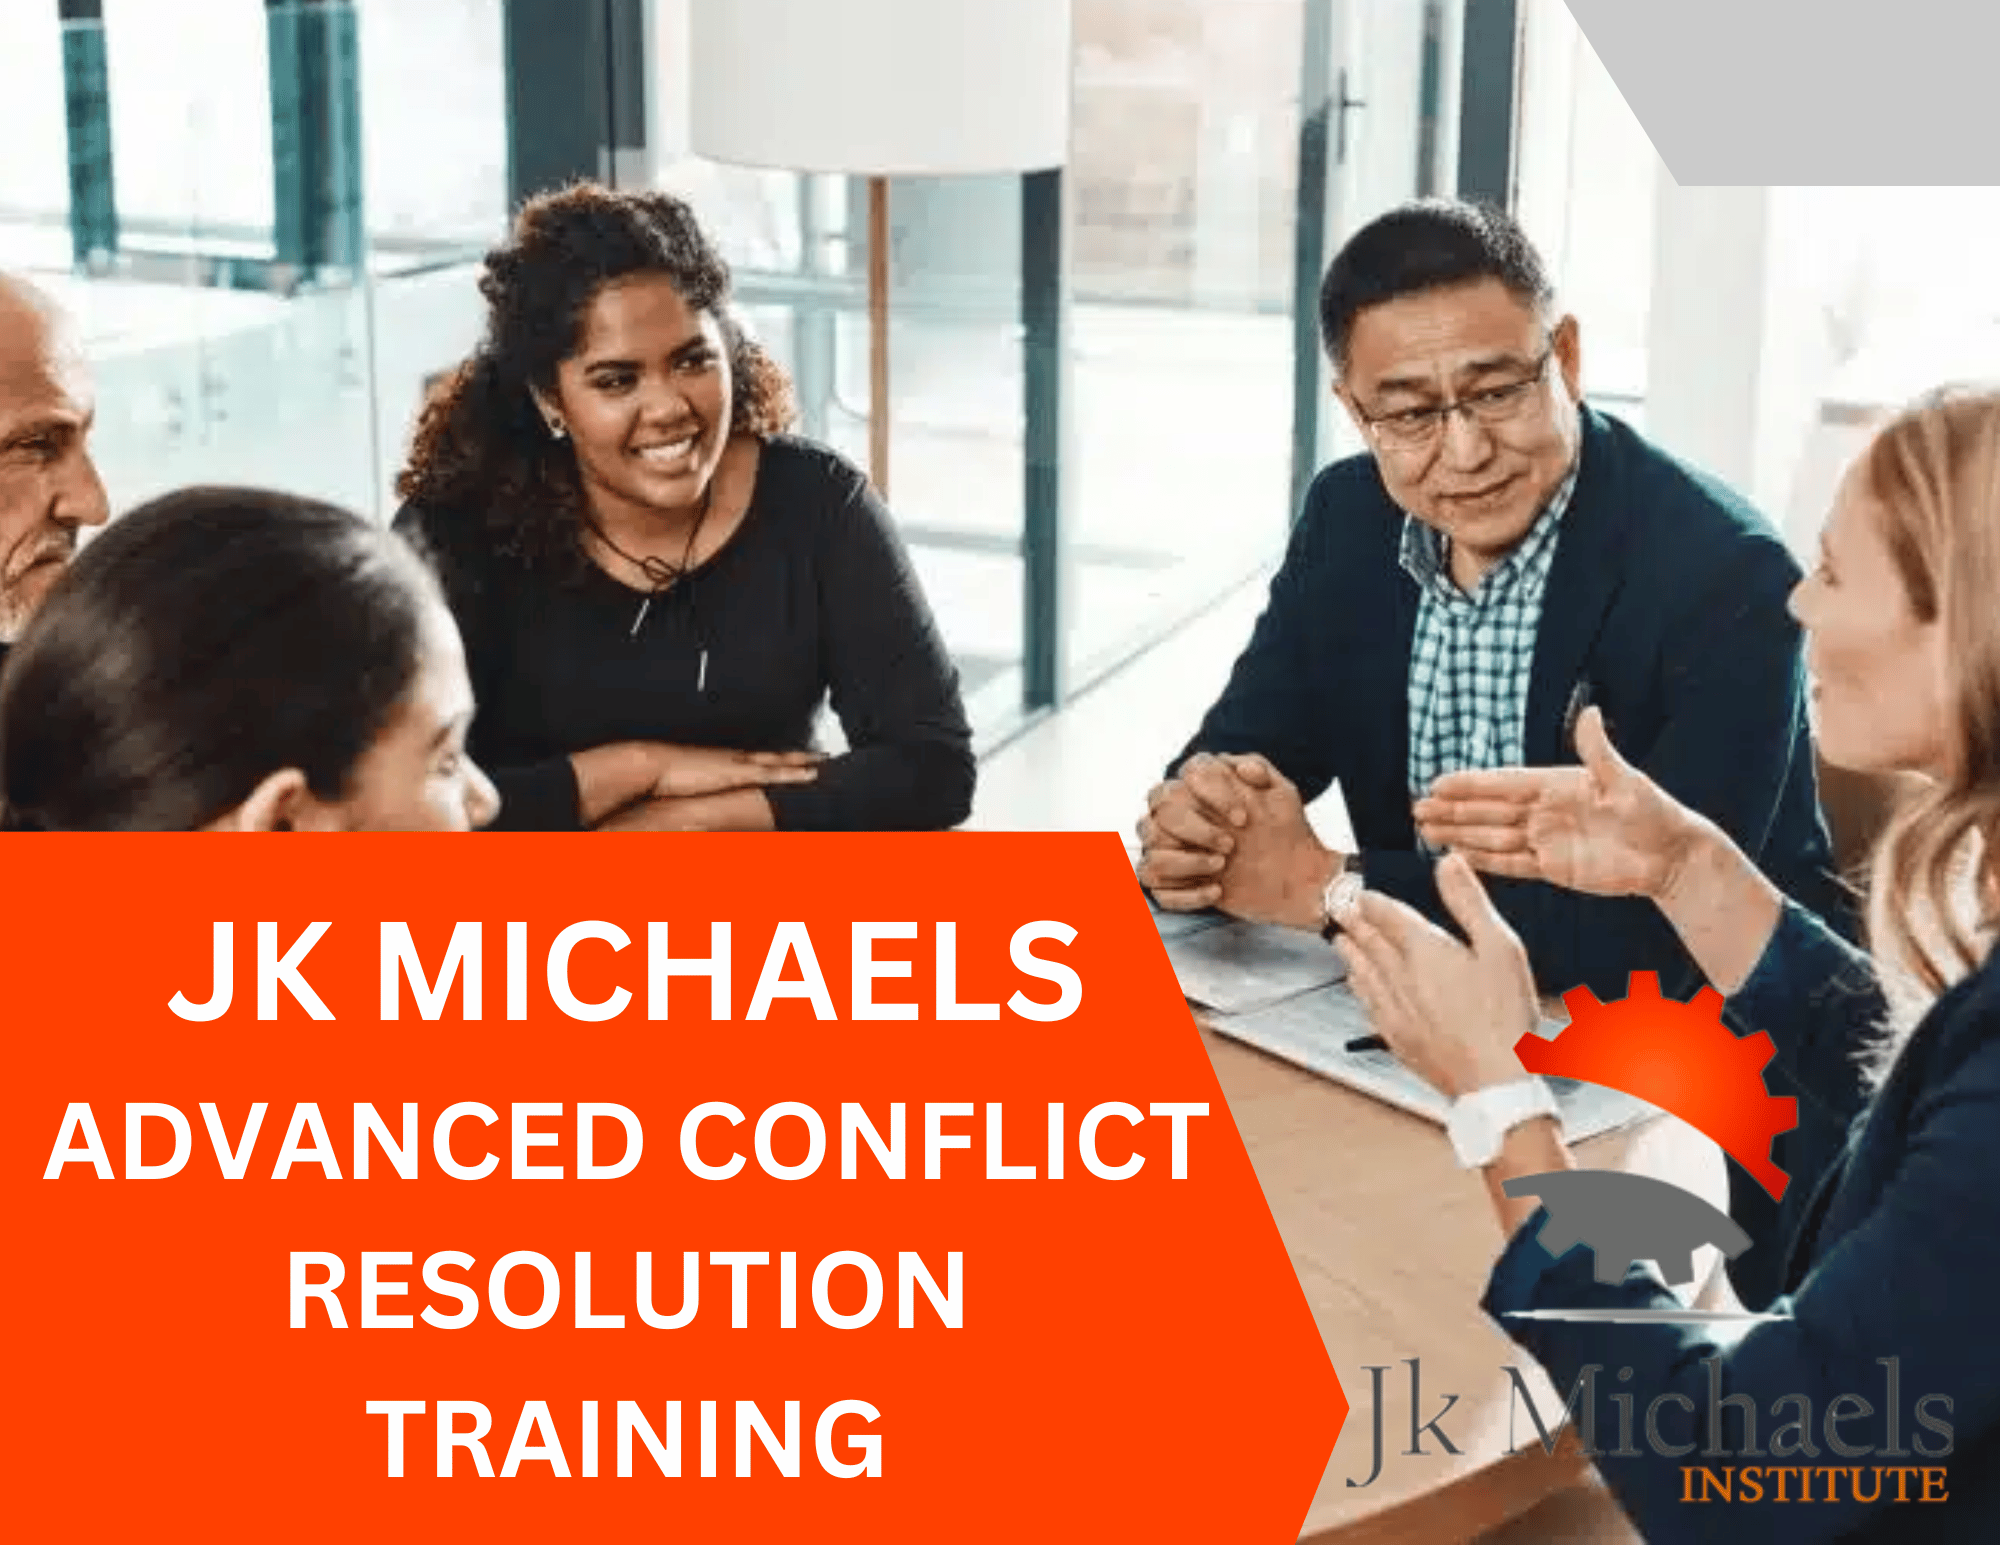 ADVANCED CONFLICT RESOLUTION TRAINING